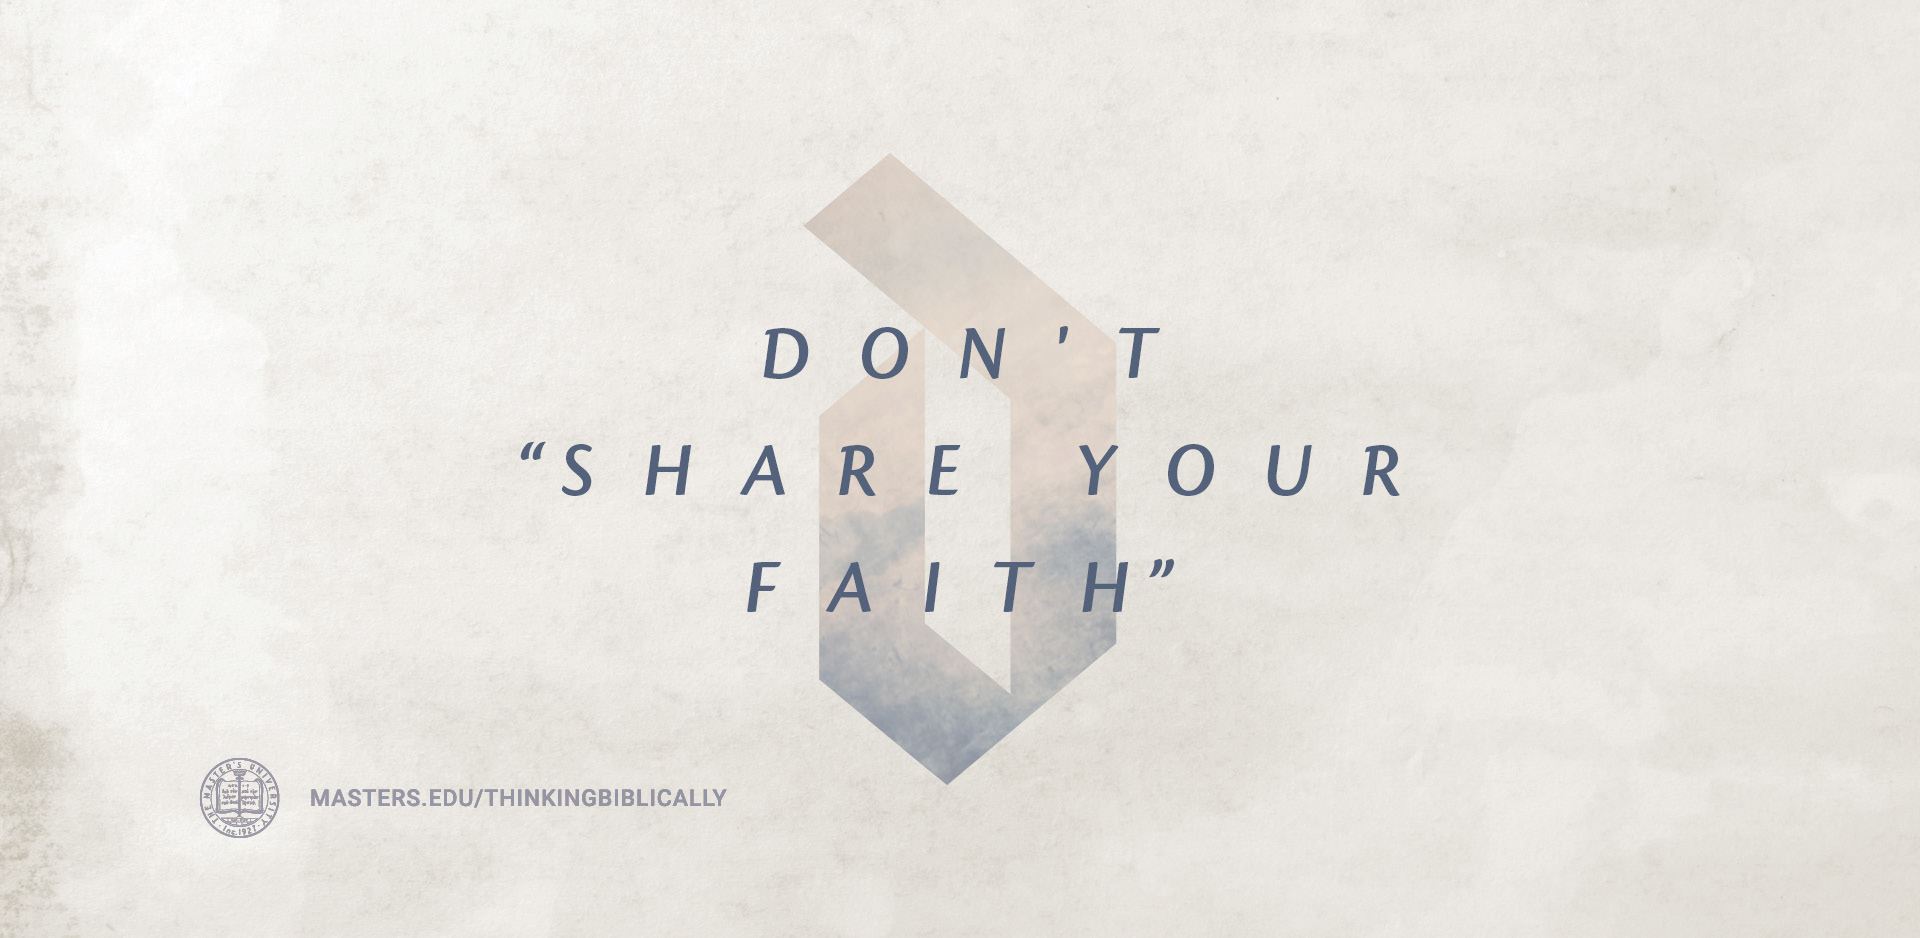 Don’t “Share Your Faith” Featured Image